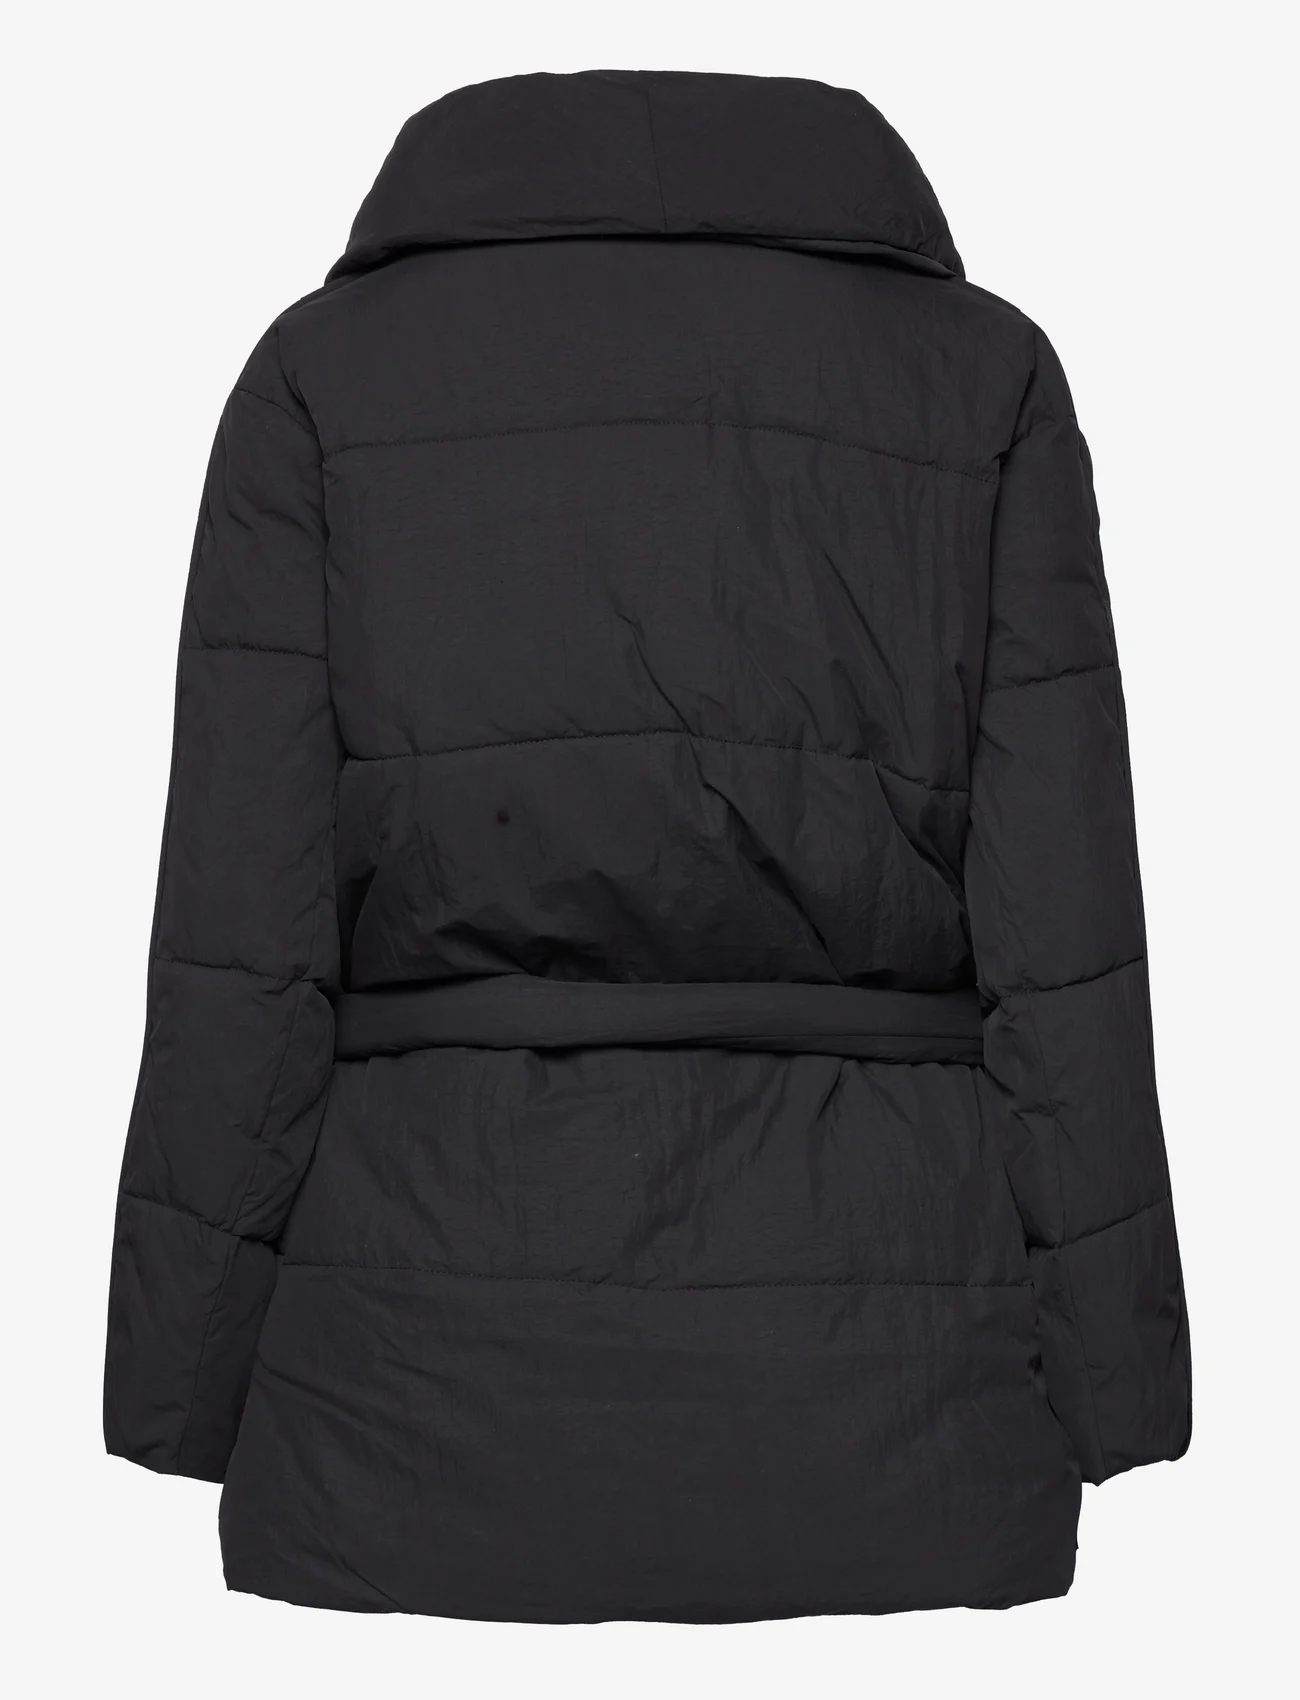 Esprit Casual - Quilted puffer jacket with belt - paminkštintosios striukės - black - 1